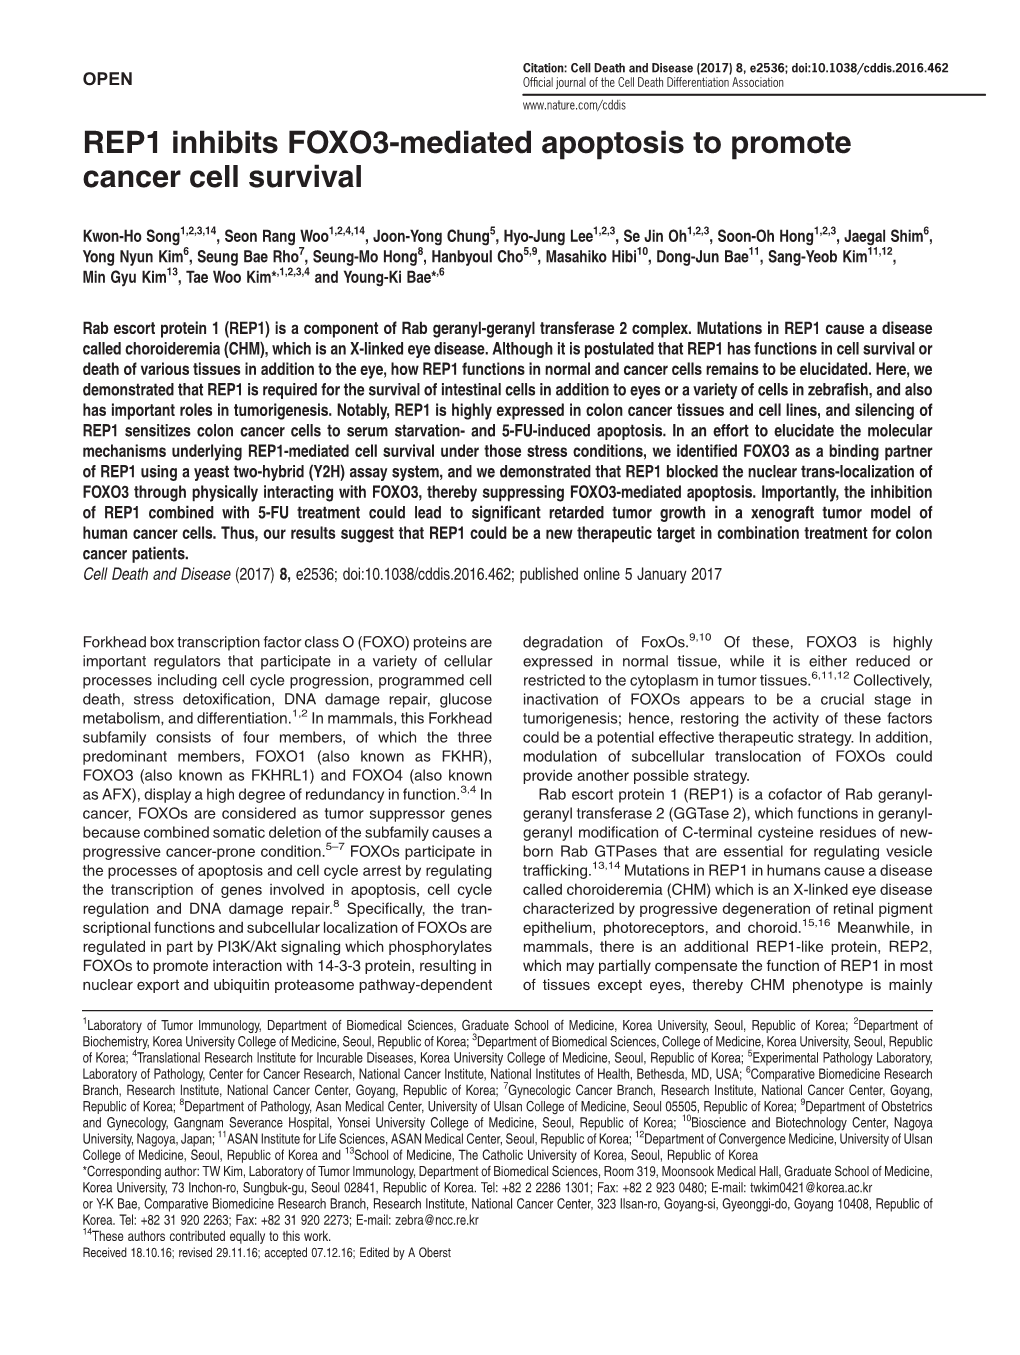 REP1 Inhibits FOXO3-Mediated Apoptosis to Promote Cancer Cell Survival